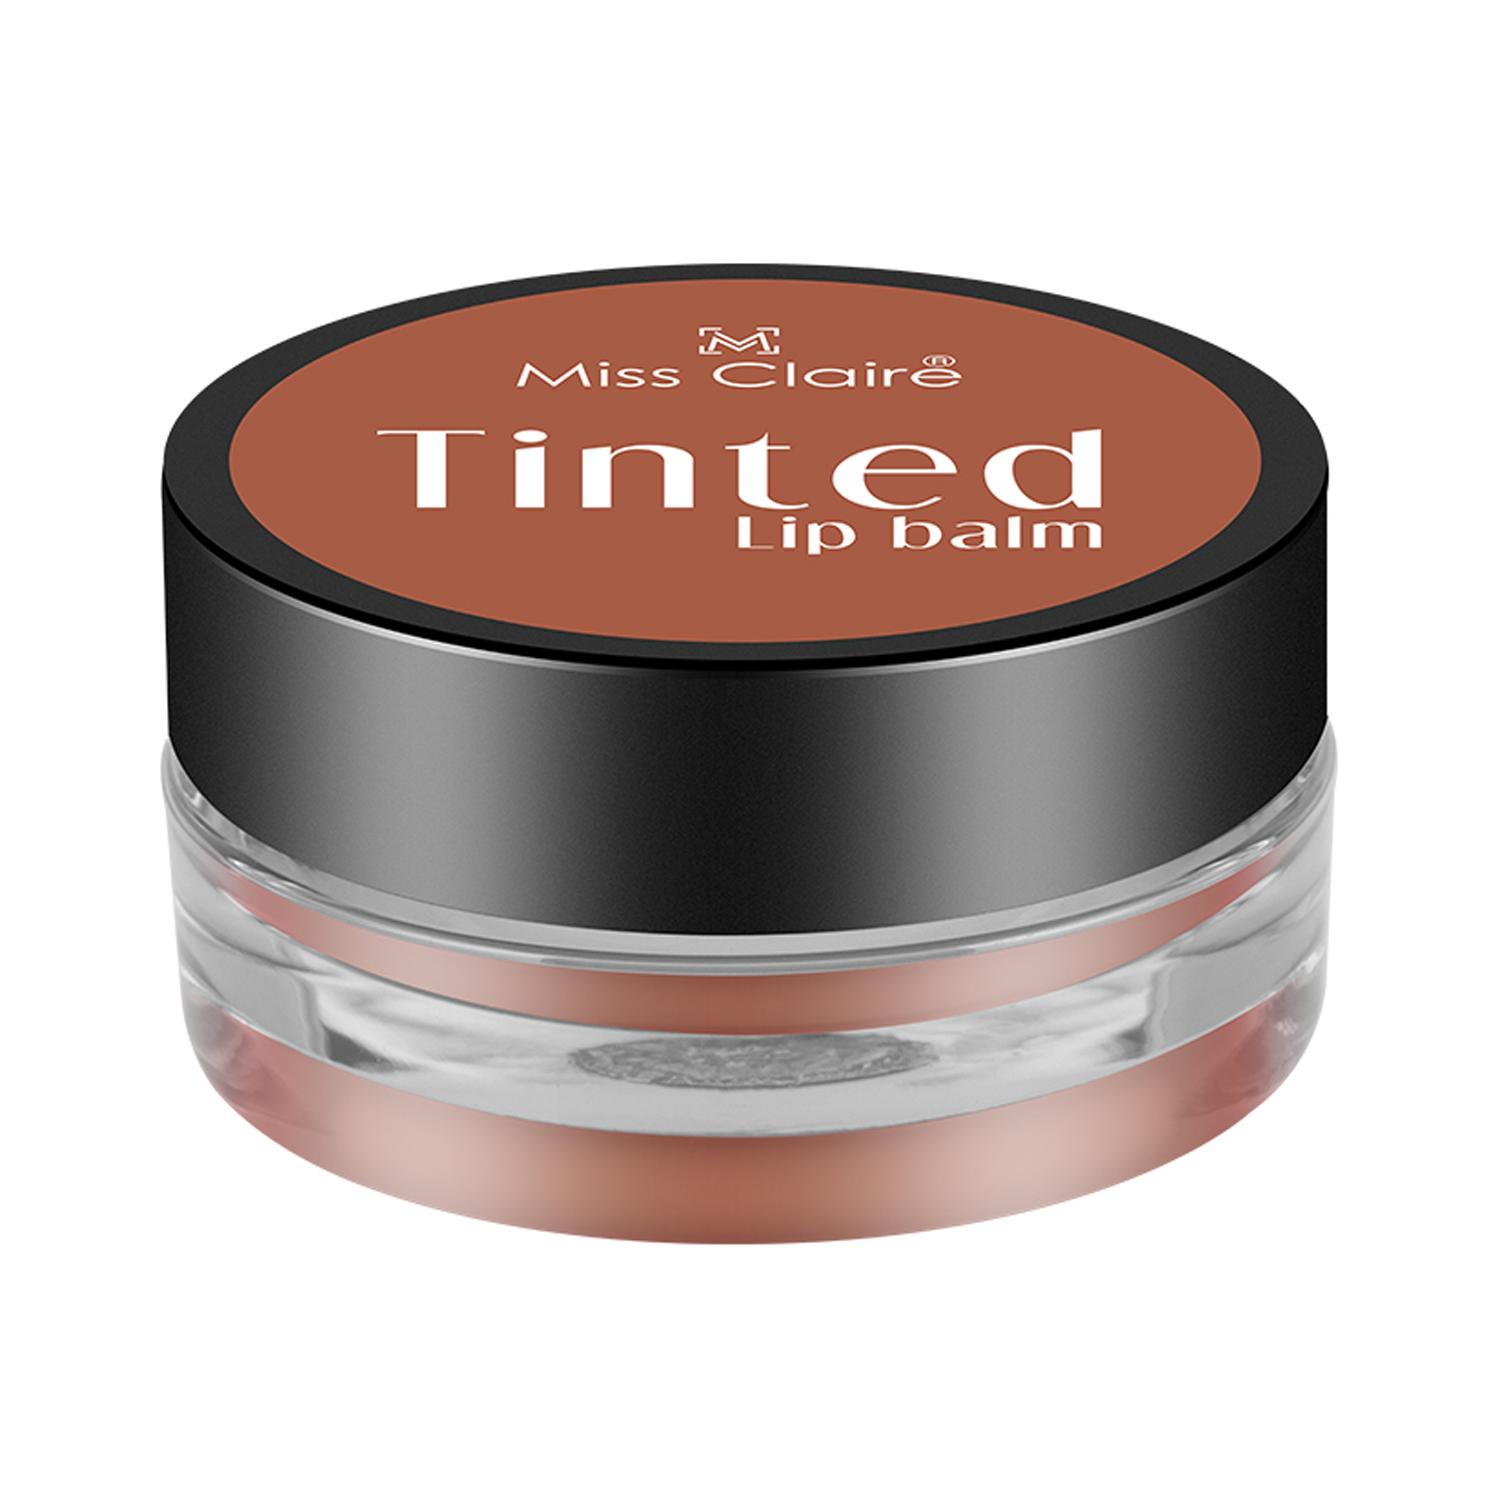 Miss Claire Tinted Lip Balm - 03 Brown (3g)